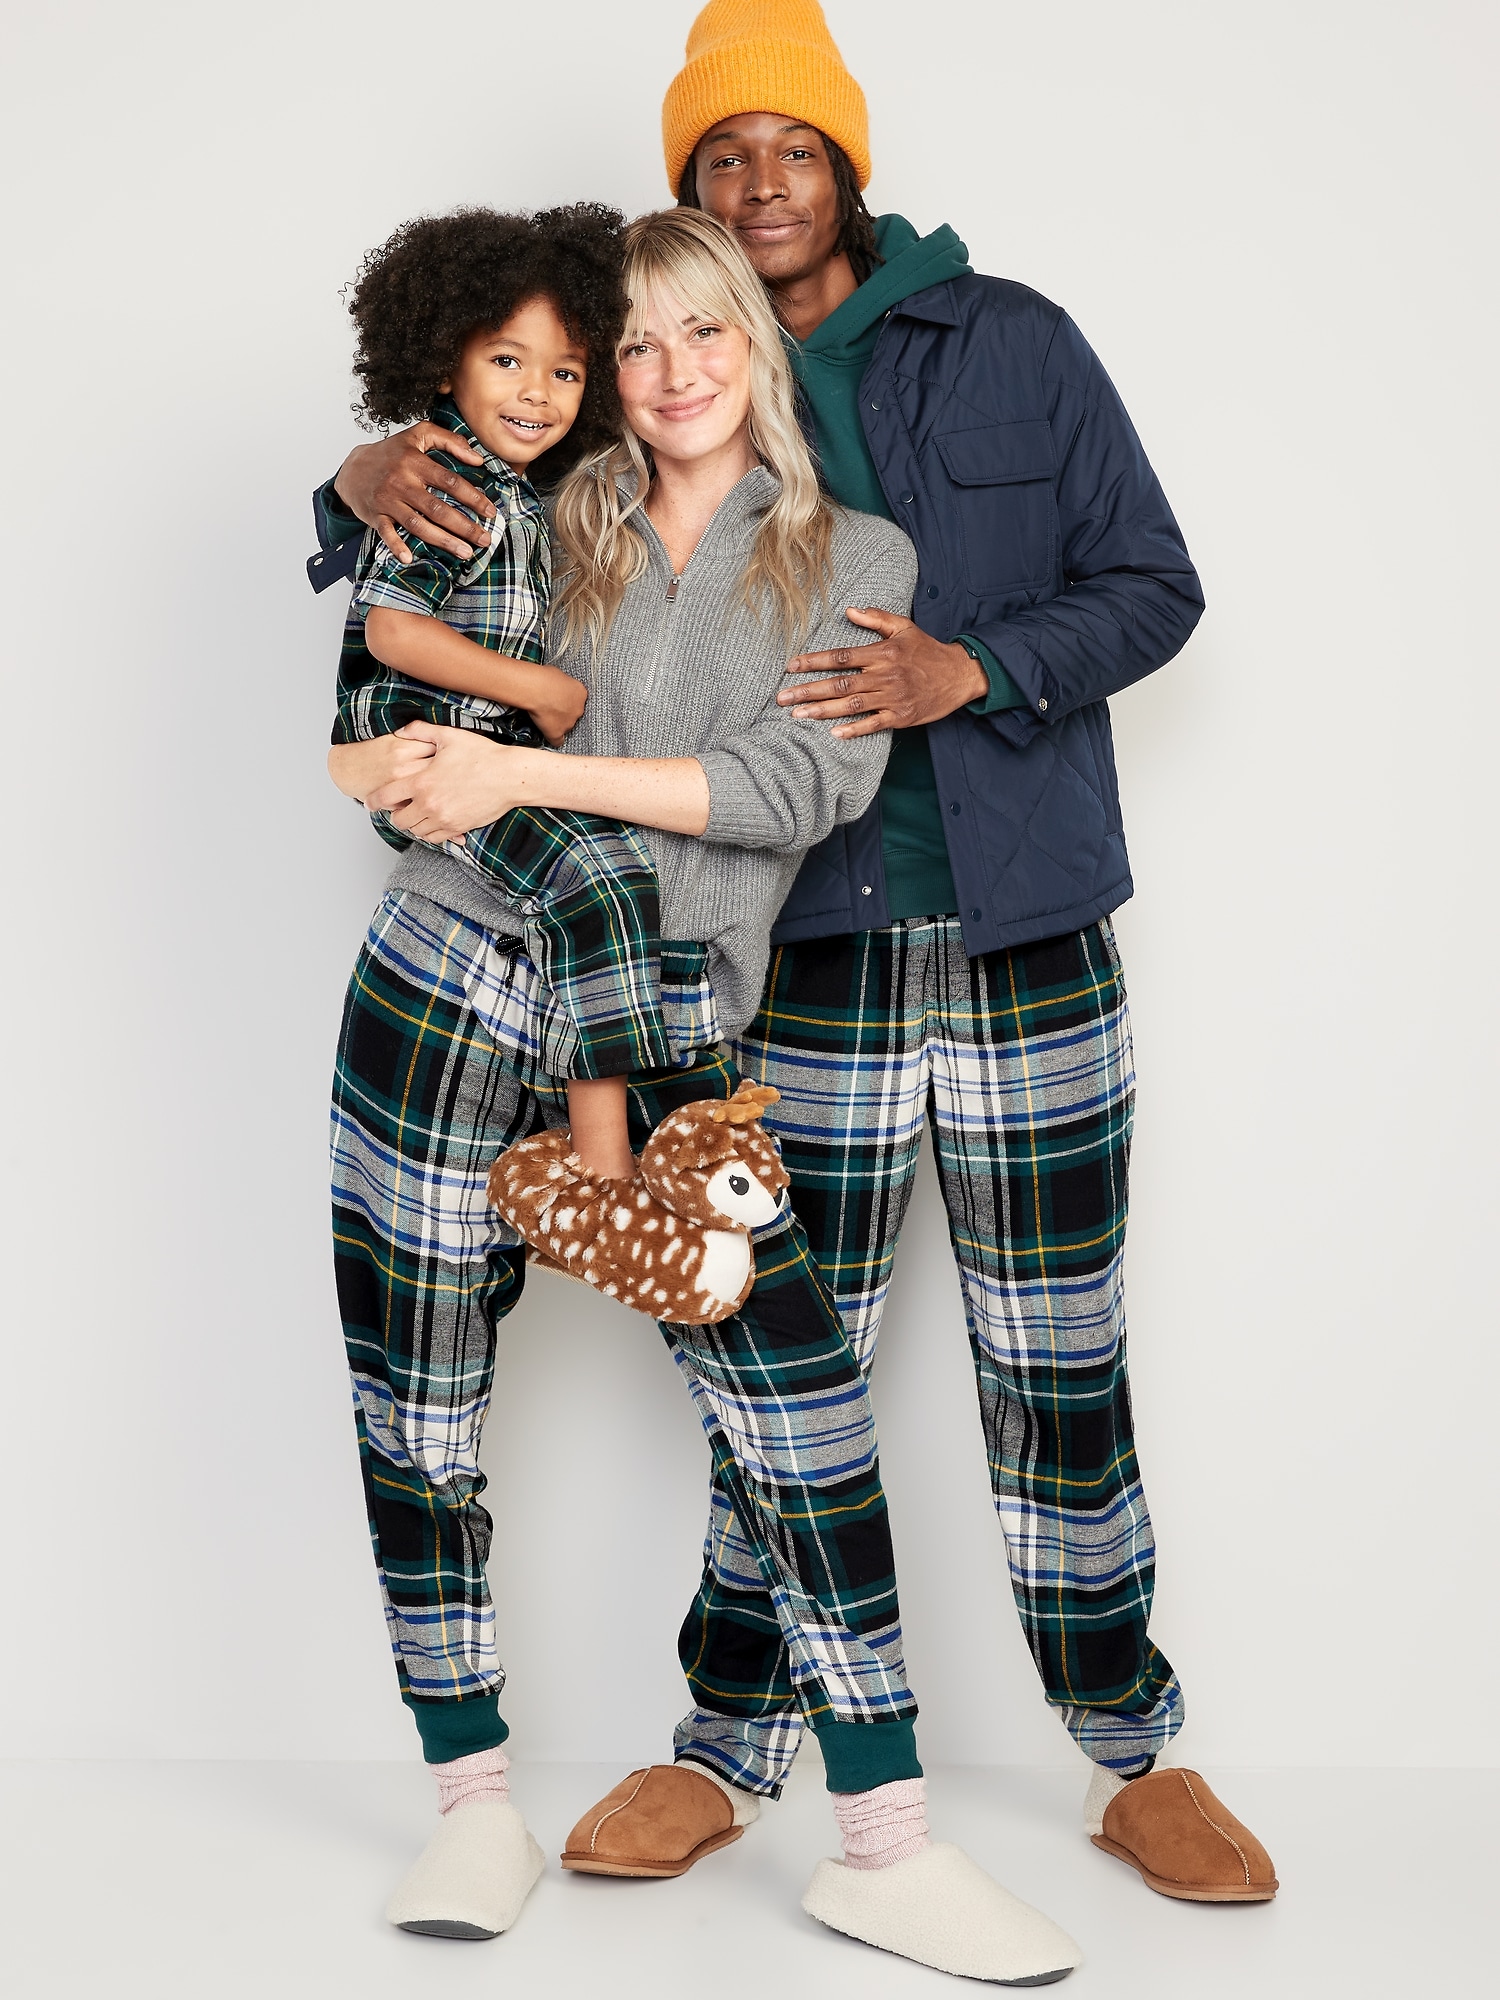 Printed Flannel Jogger Pajama Pants for Women, Old Navy